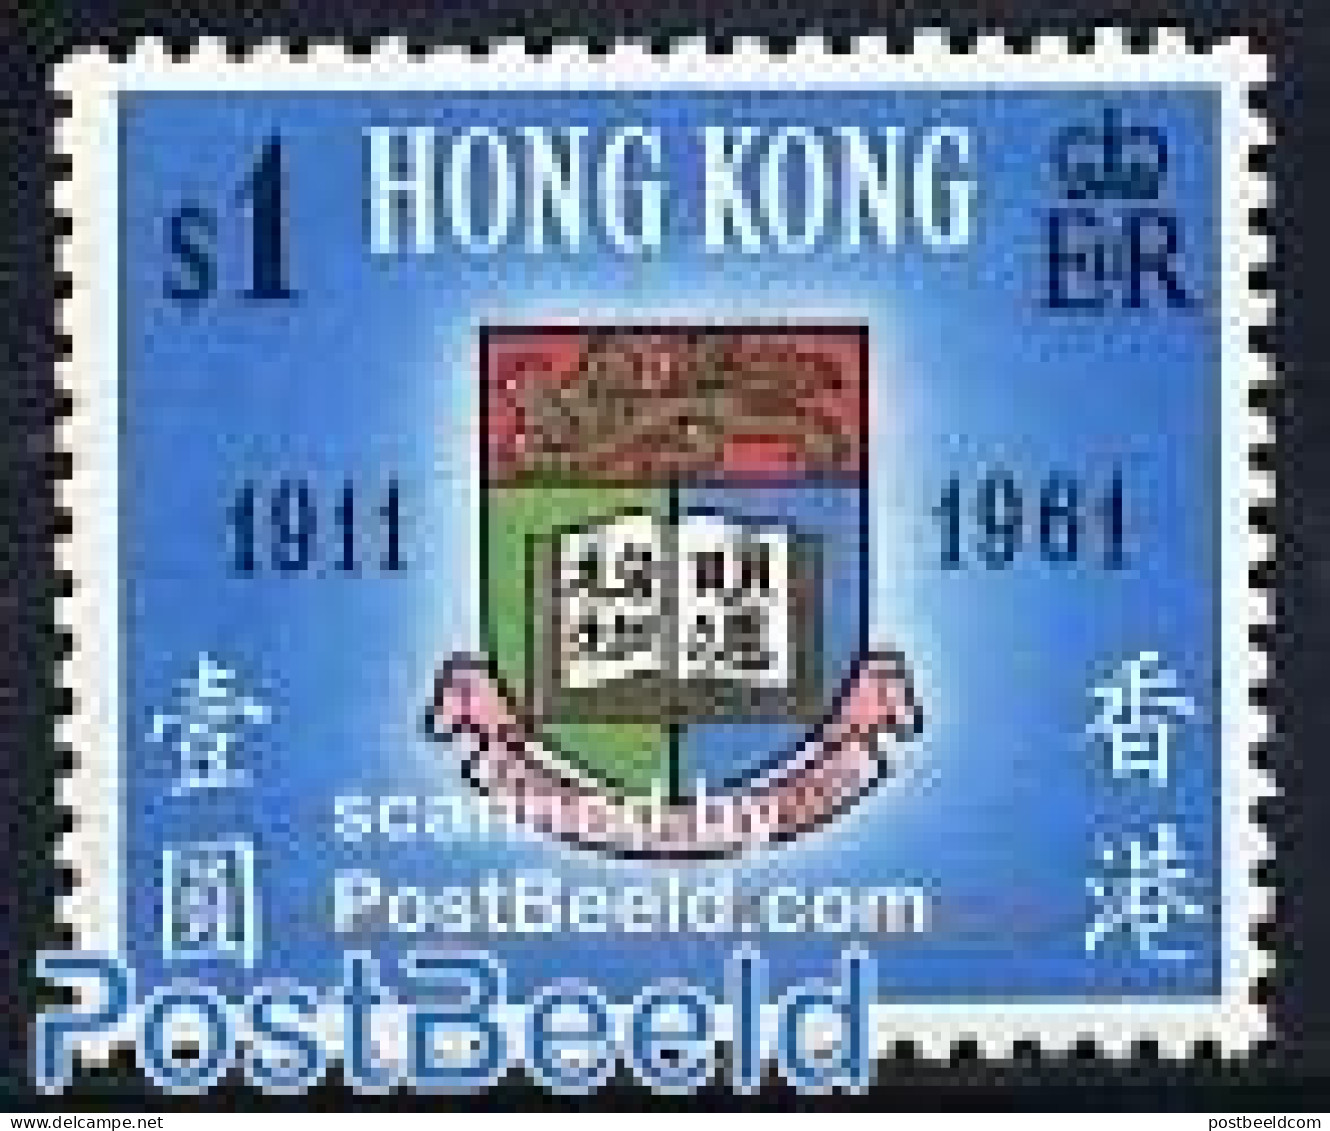 Hong Kong 1961 University 50th Anniversary 1v, Mint NH, History - Science - Coat Of Arms - Education - Unused Stamps